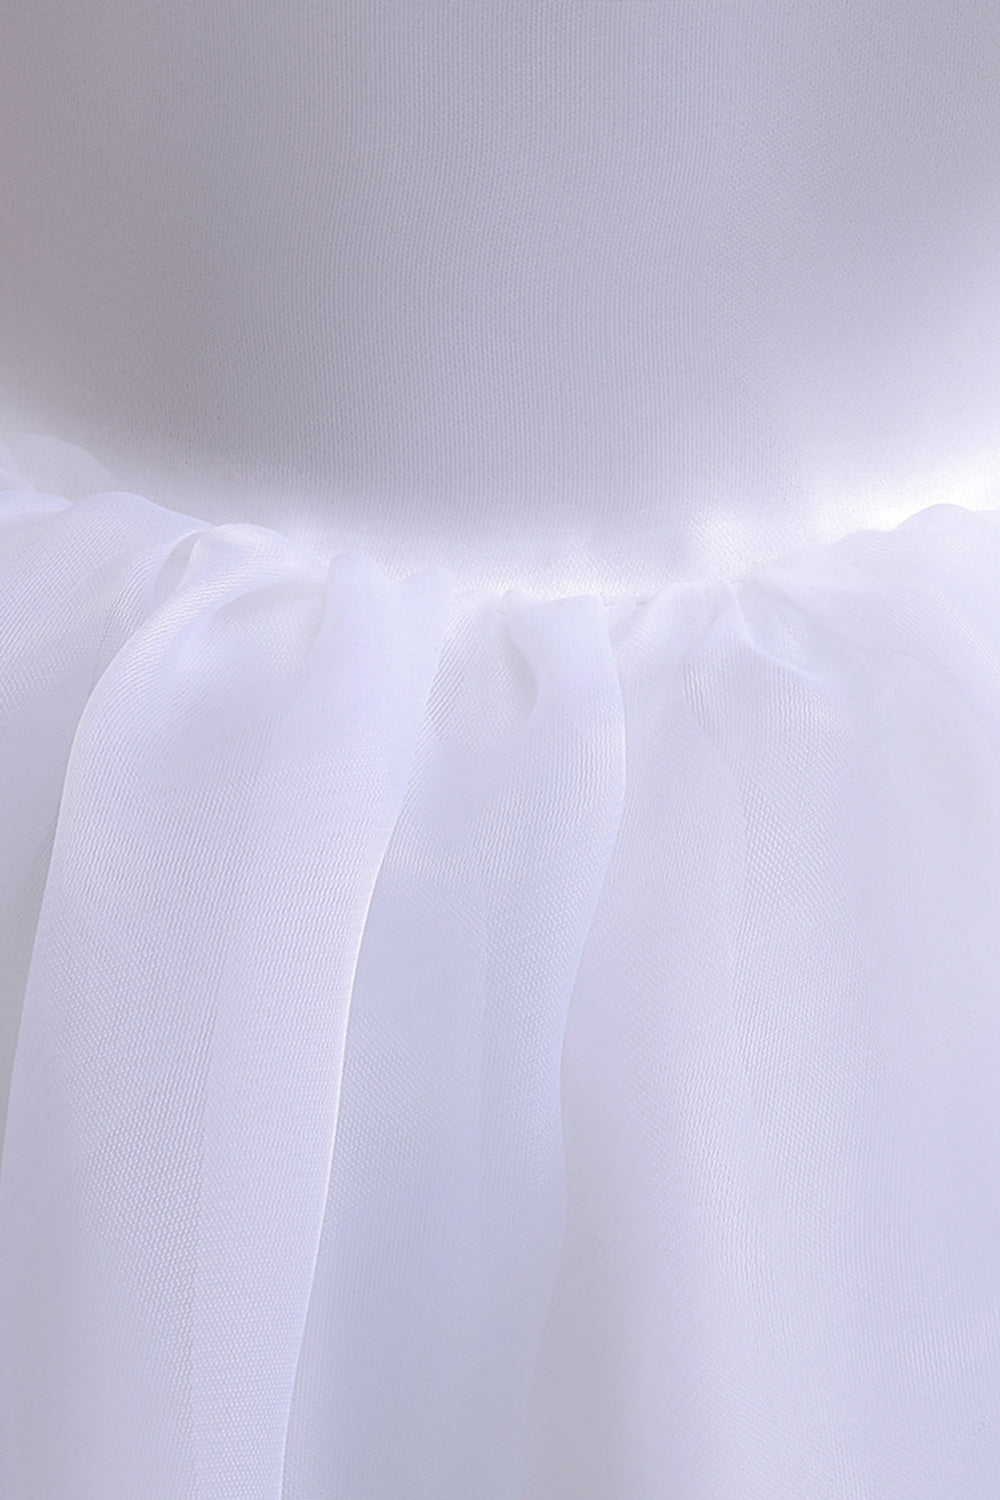 White Tulle A Line Flower Girl Dress with Puff Sleeves